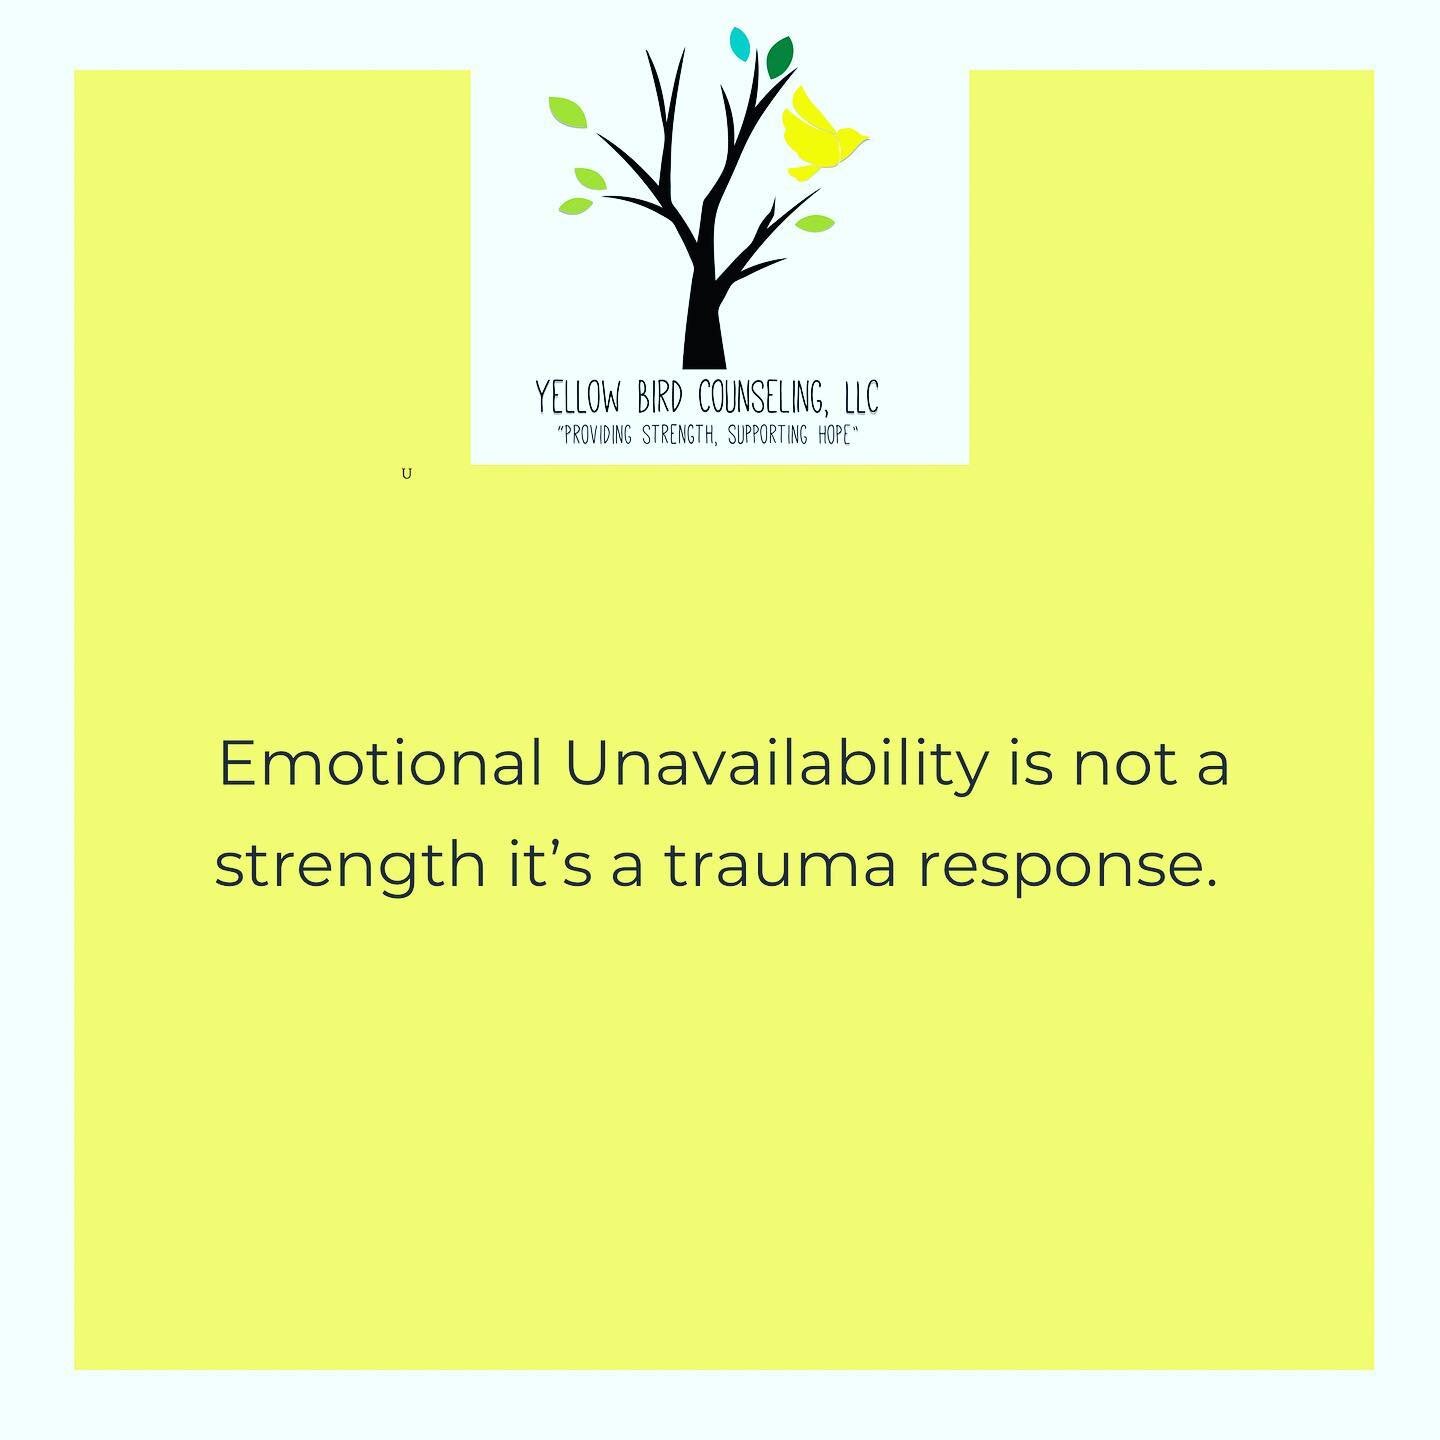 I know people that truly wear their emotional unavailability as a badge of honor. These people have a tendency to think your kind warm behavior is problematic.

.
.
.
.
.

#enneagram8 #enneagram #enneagram4 #enneagram6 #enneagram9 #enneagram2 #enneag